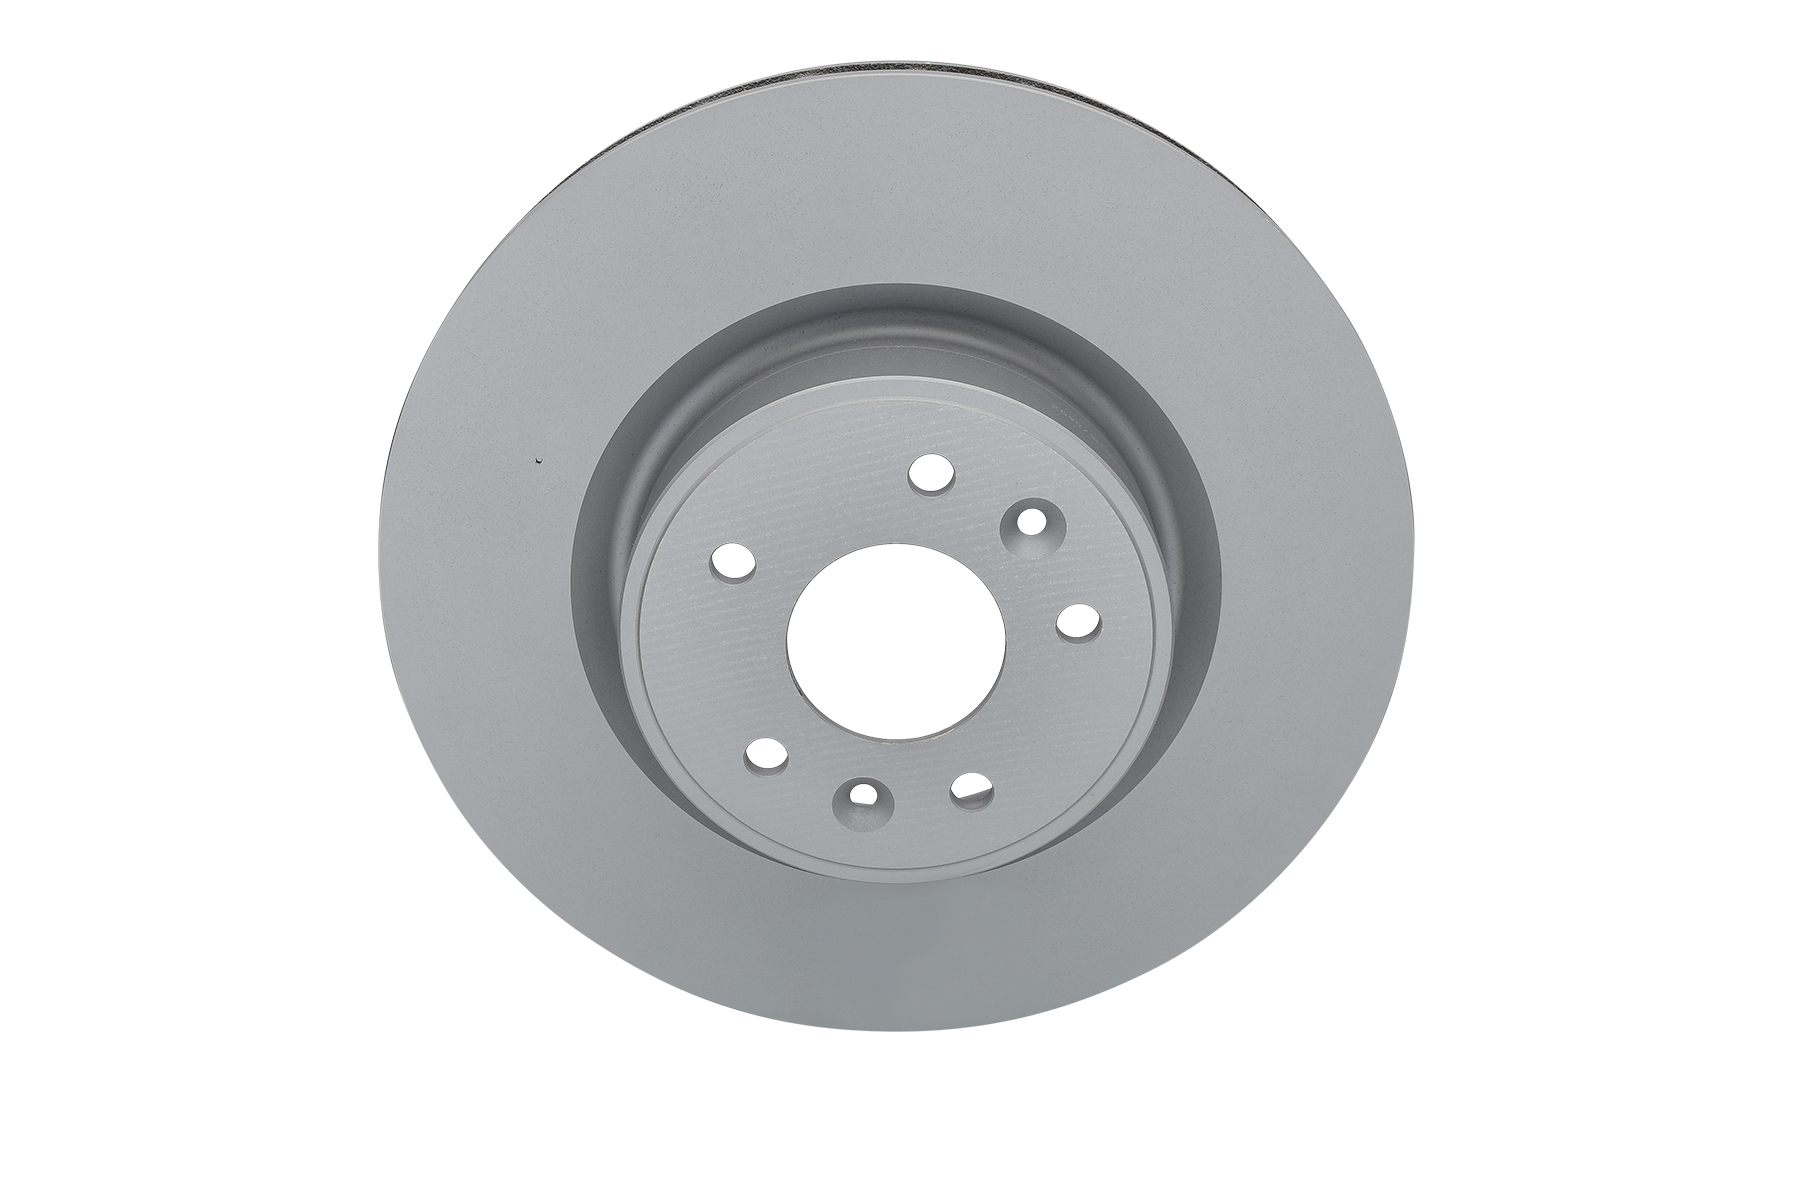 ATE 24.0128-0261.1 Brake disc 340,0x28,0mm, 5x114,3, Vented, Coated, Alloyed/High-carbon